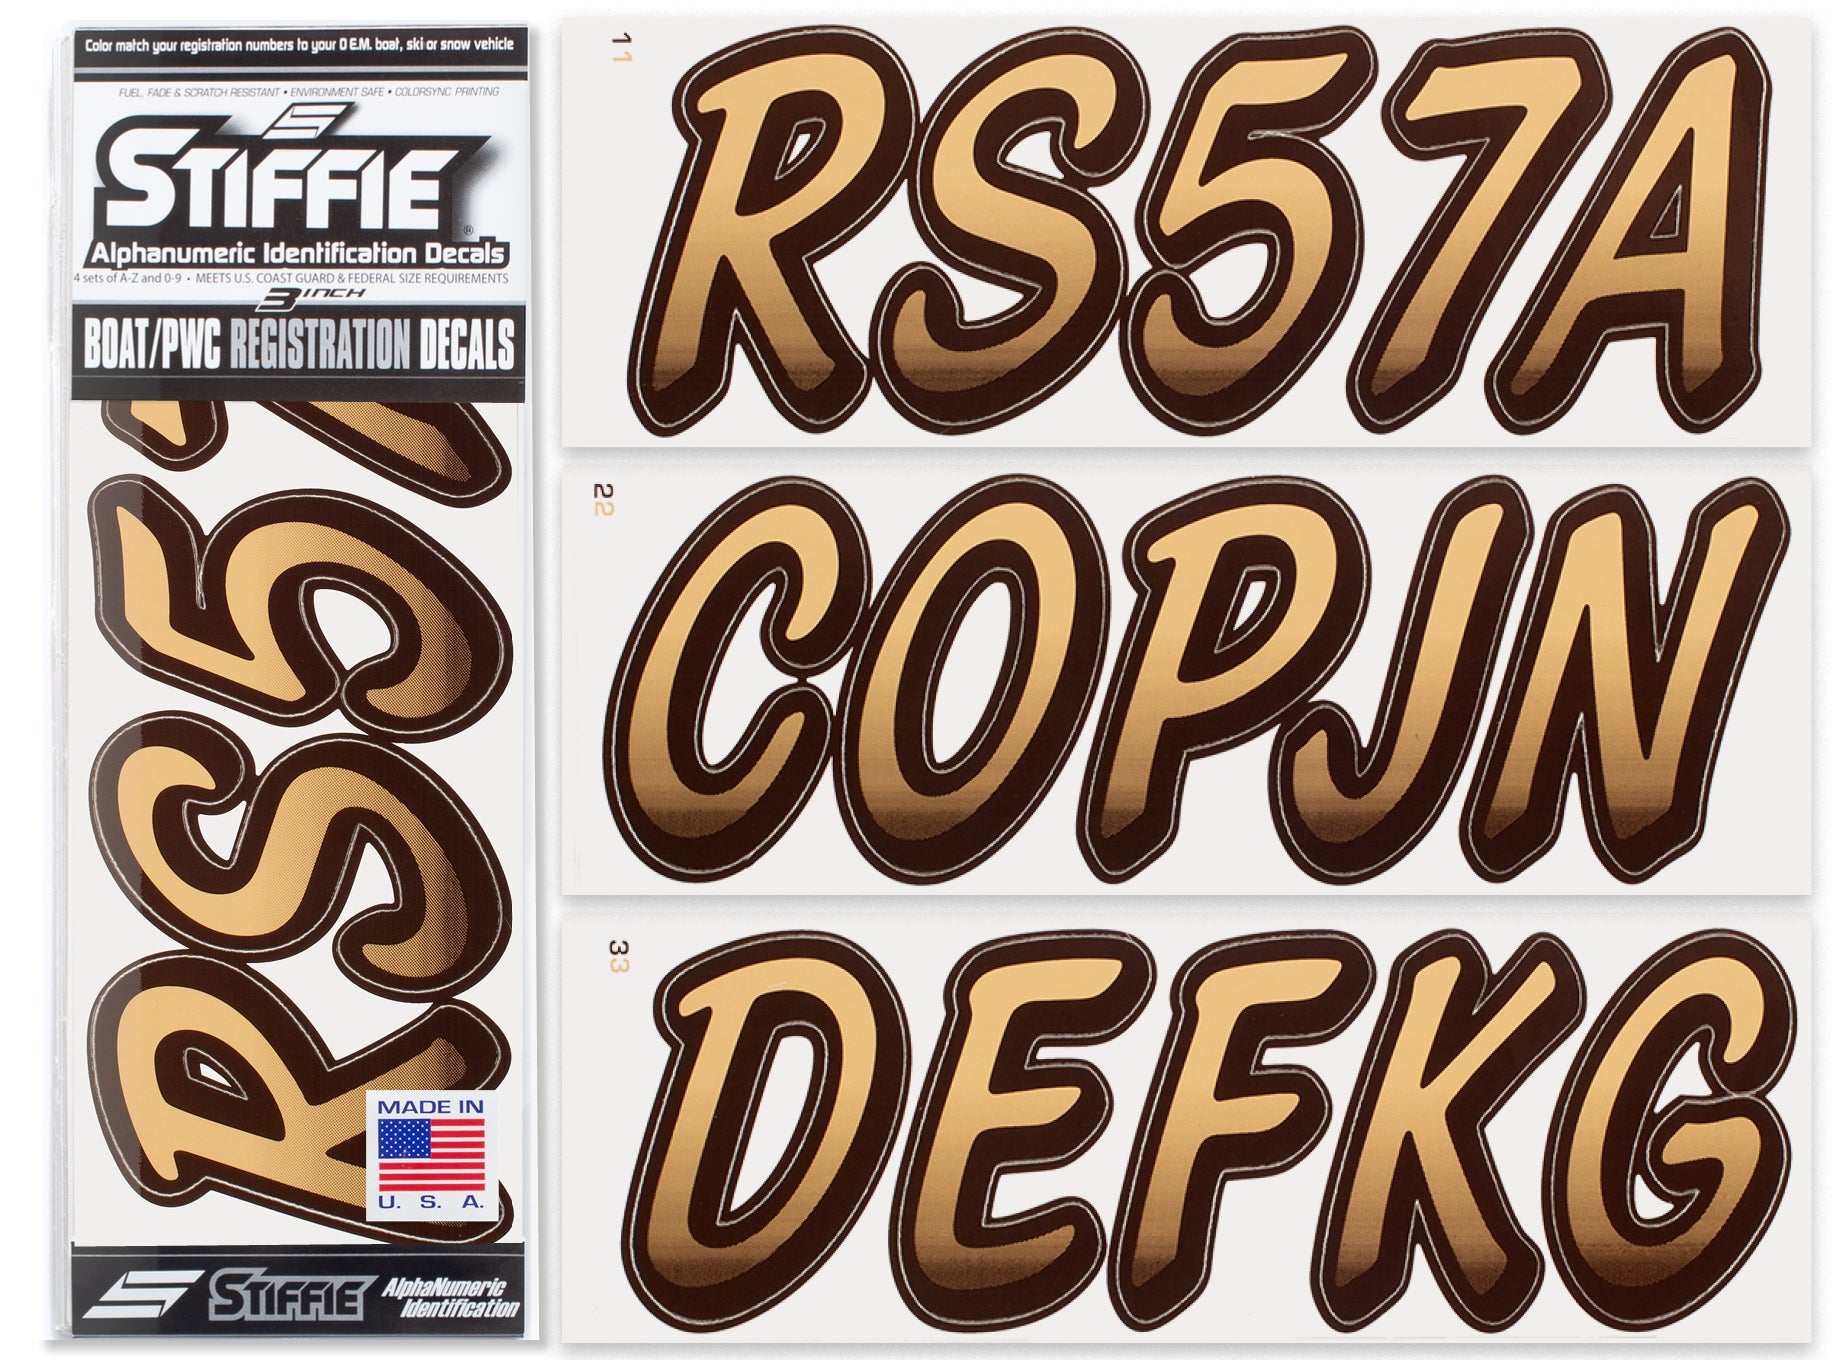 Stiffie Whipline Sand/Brown 3" Alpha-Numeric Registration Identification Numbers Stickers Decals for Boats & Personal Watercraft